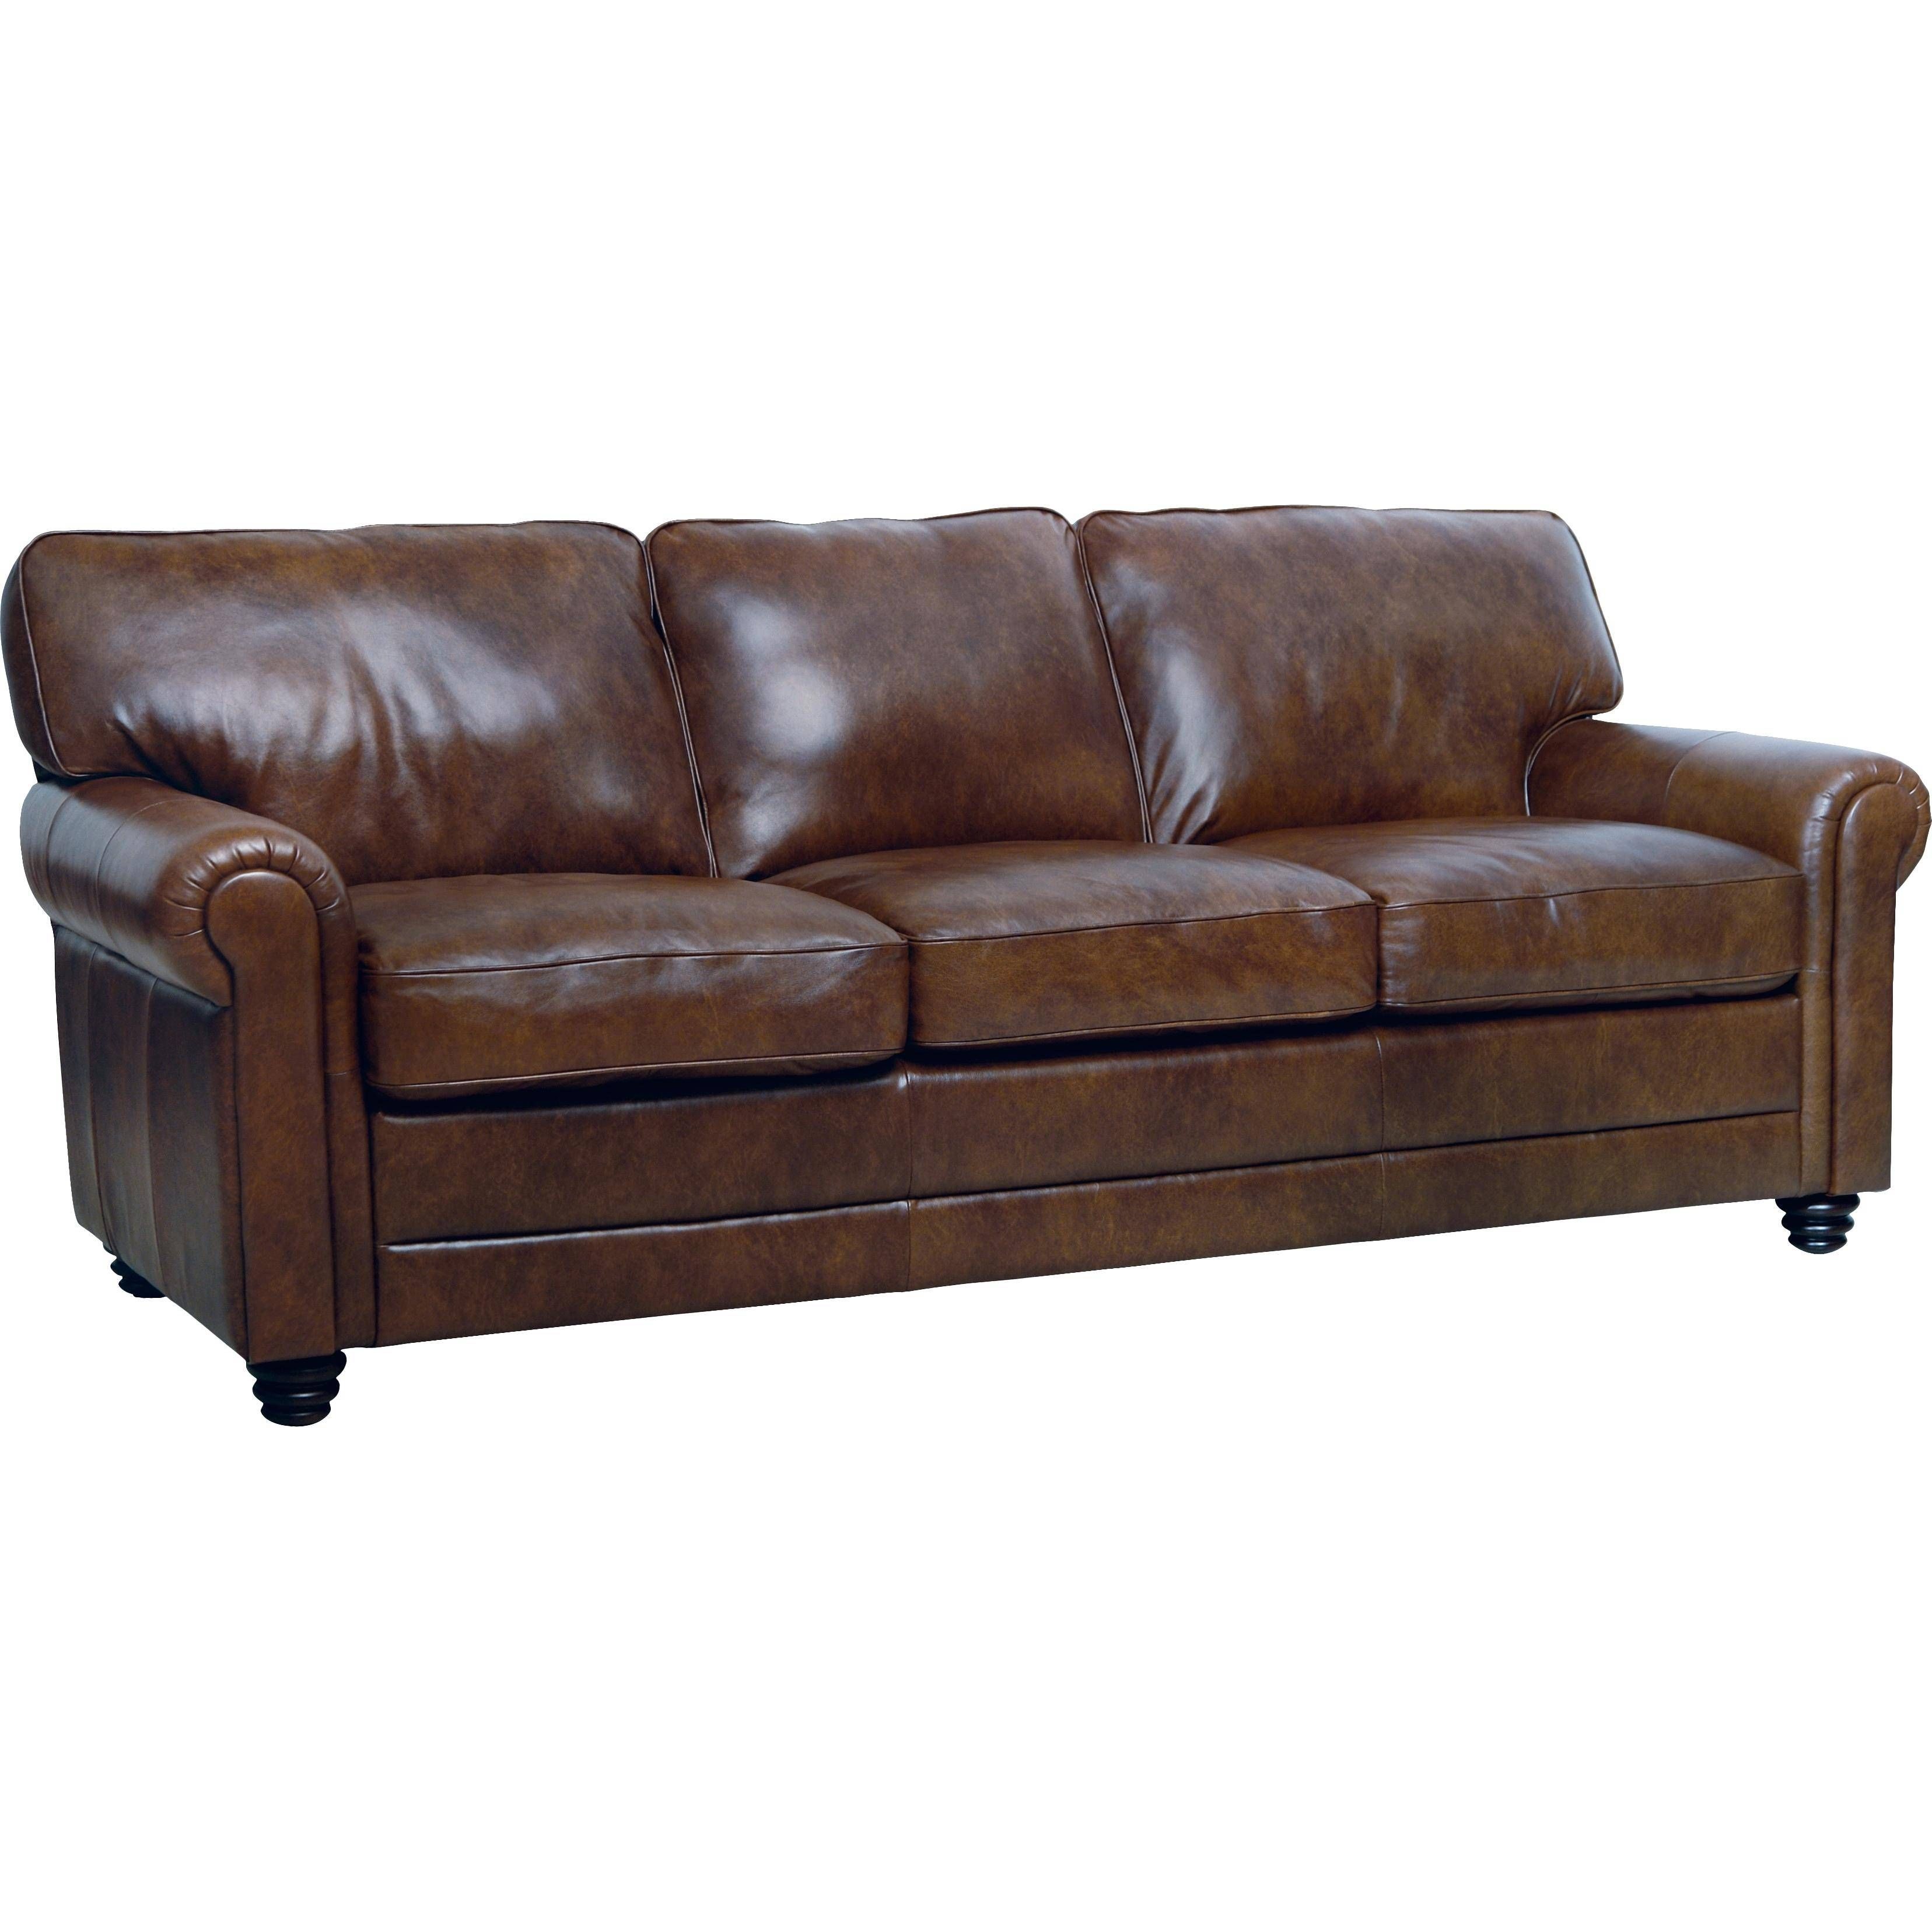 Sofas Center : Wonderful Western Style Sectional Sofas With Regarding Western Style Sectional Sofas (View 19 of 30)